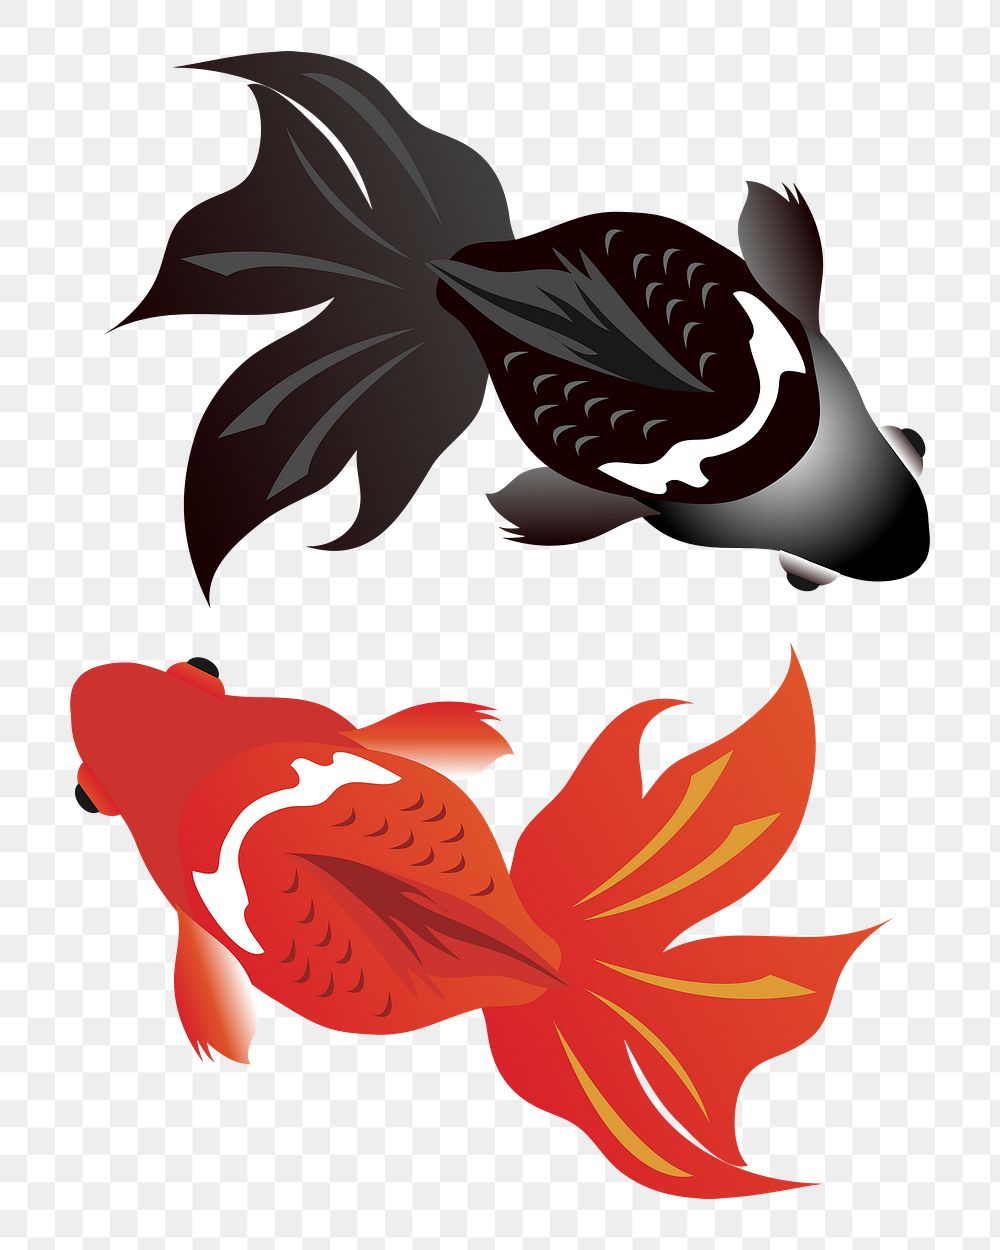 Black moor and gold fish png illustration, transparent background. Free public domain CC0 image.